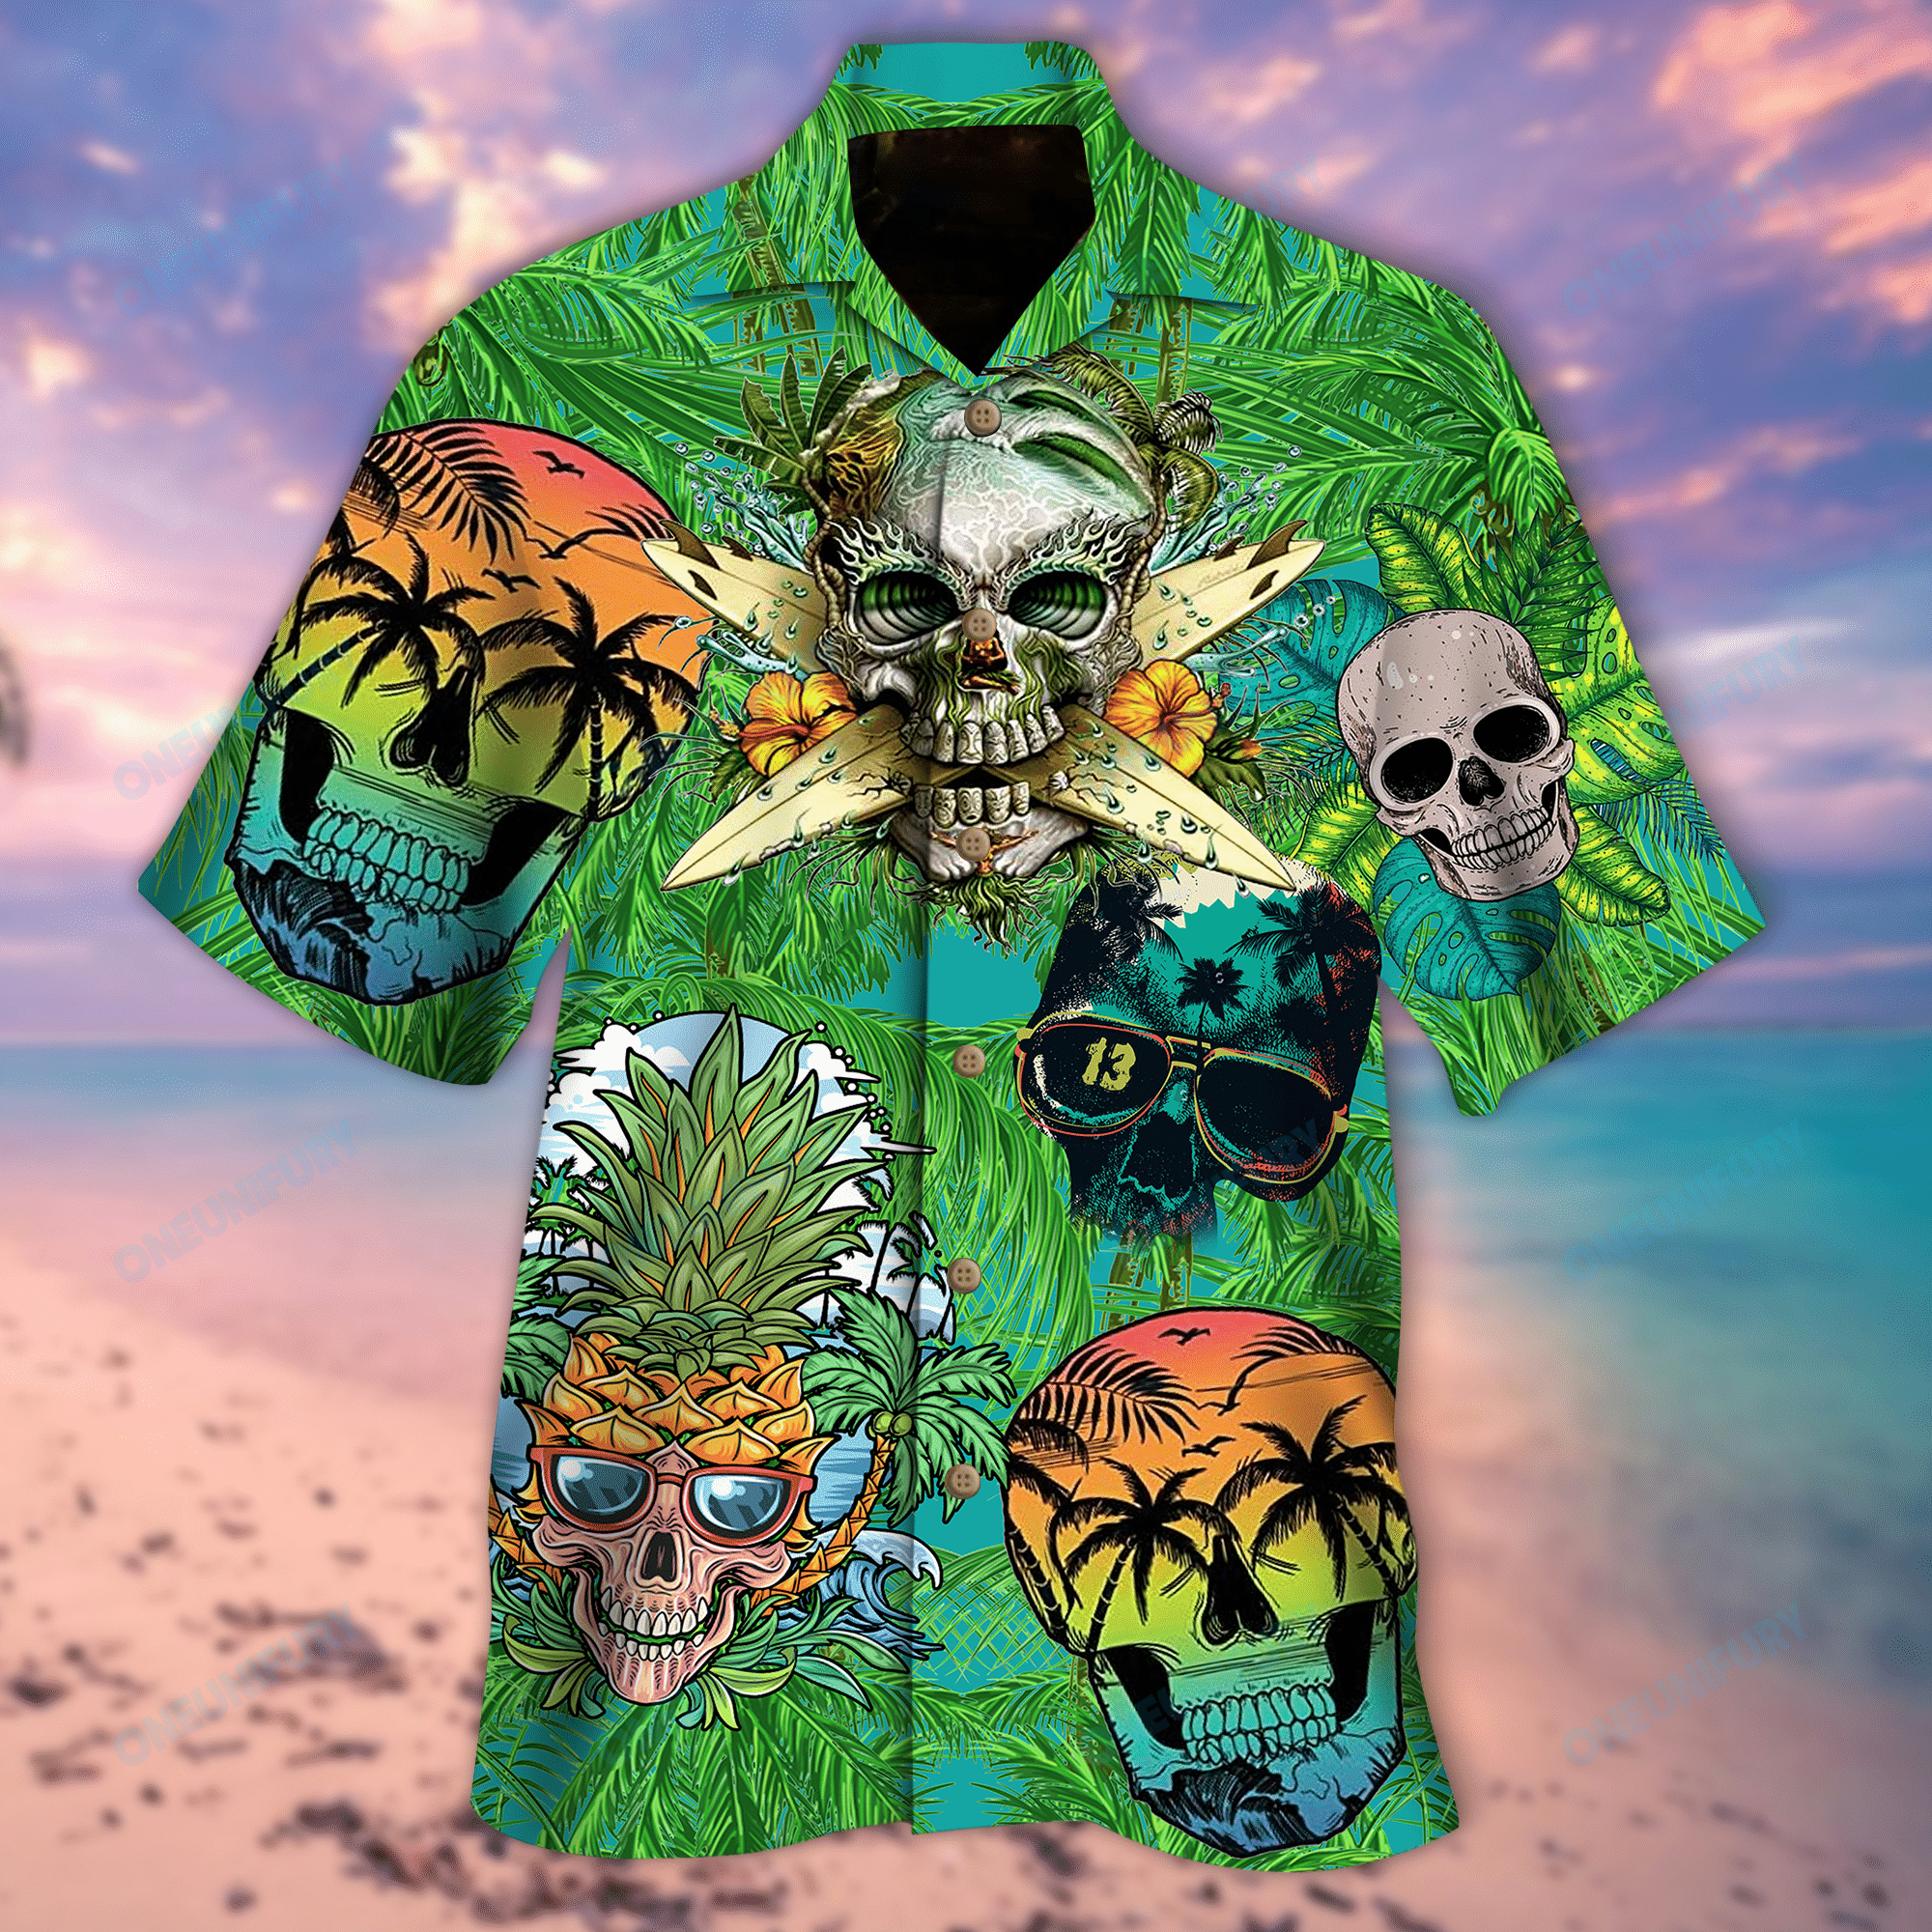 Skull Hawaiian Shirt – Where There Is Life There Is Hope